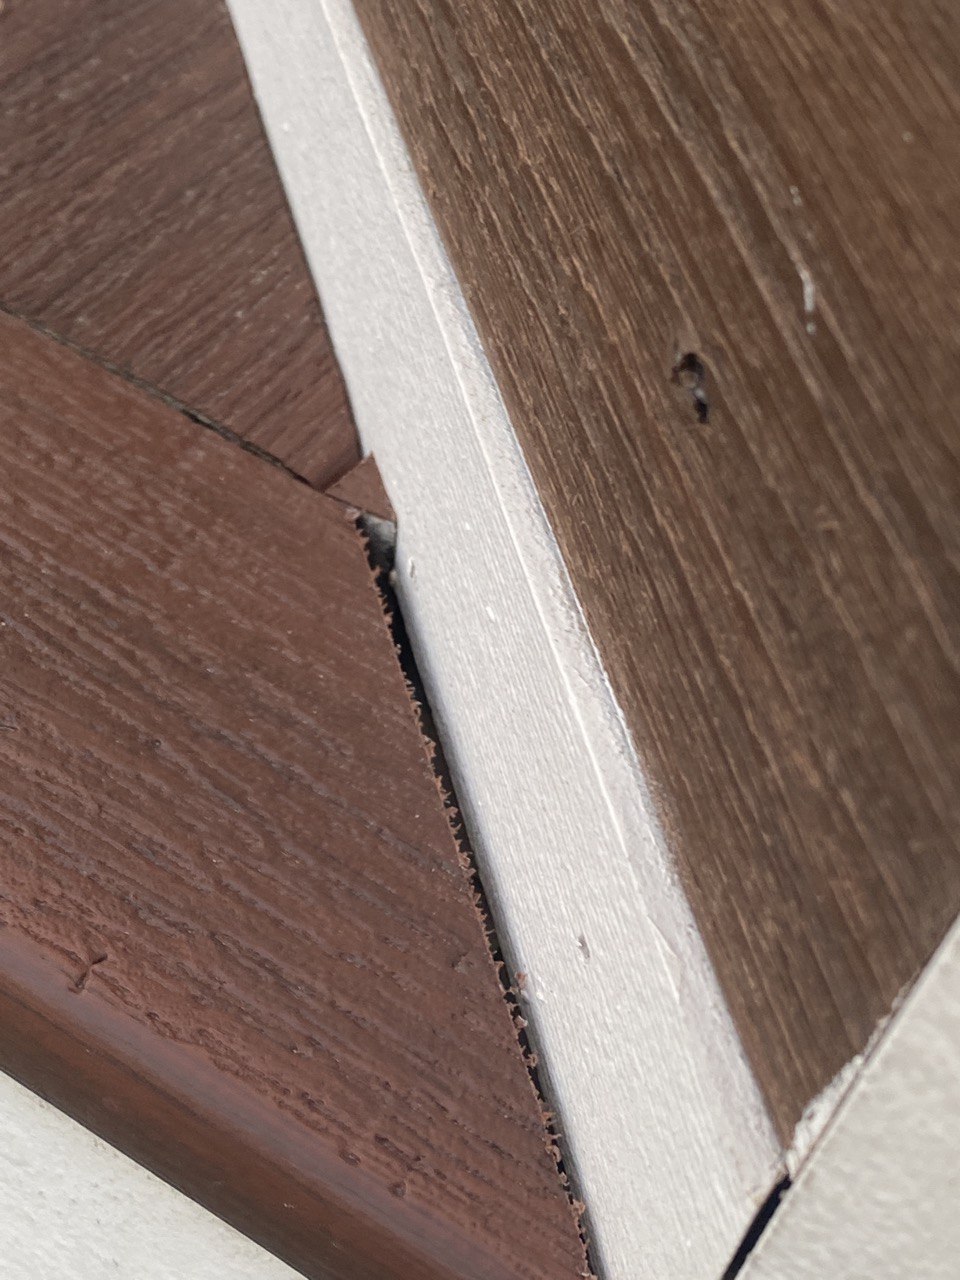 many areas like this in wood and siding, gaps